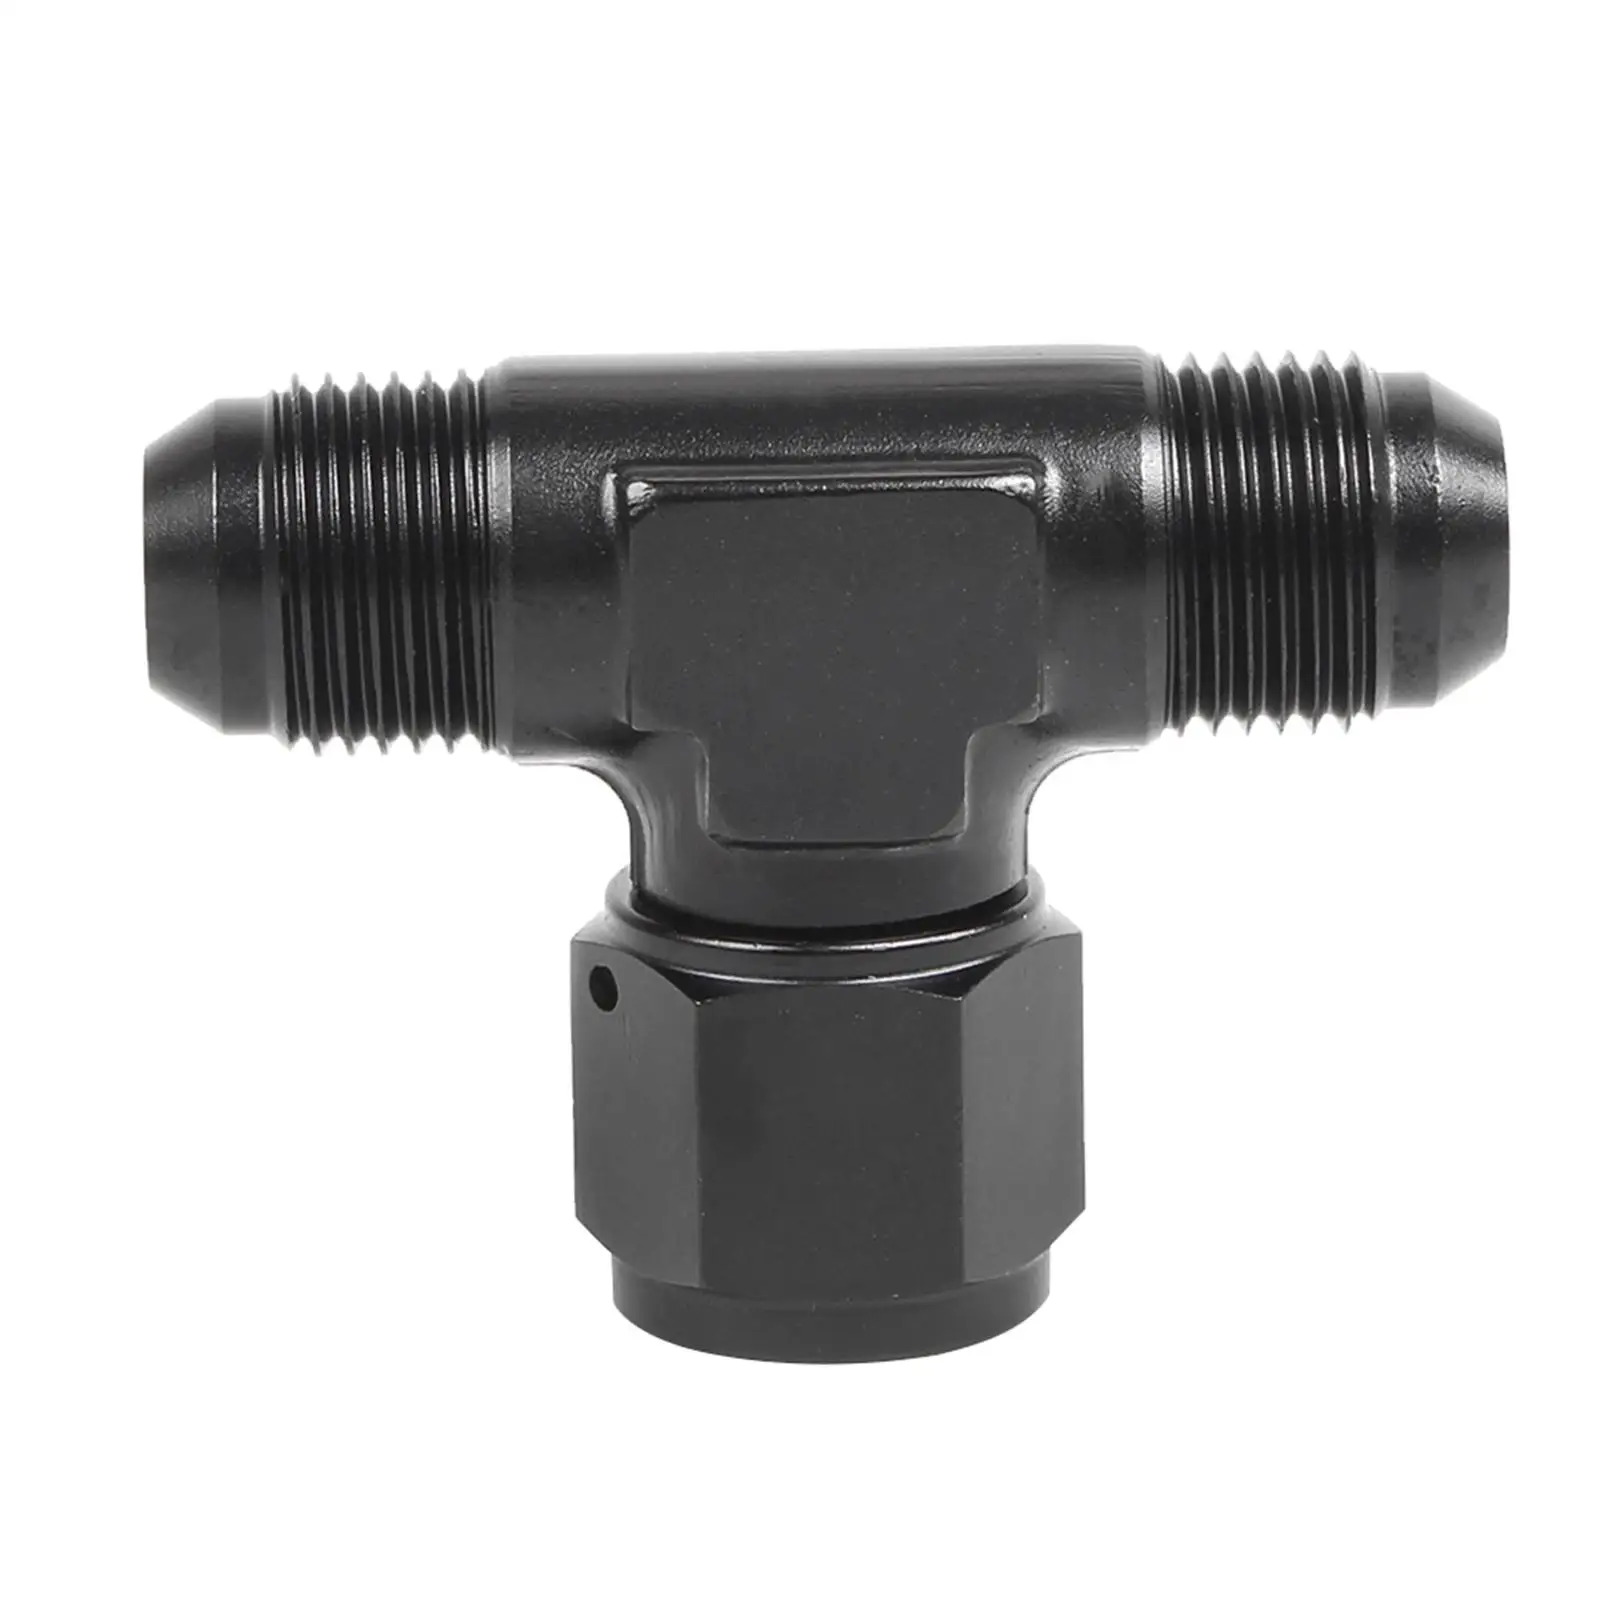 Automotive AN Male Tee Adapter Thread Oil Pipe Fittings Accessory